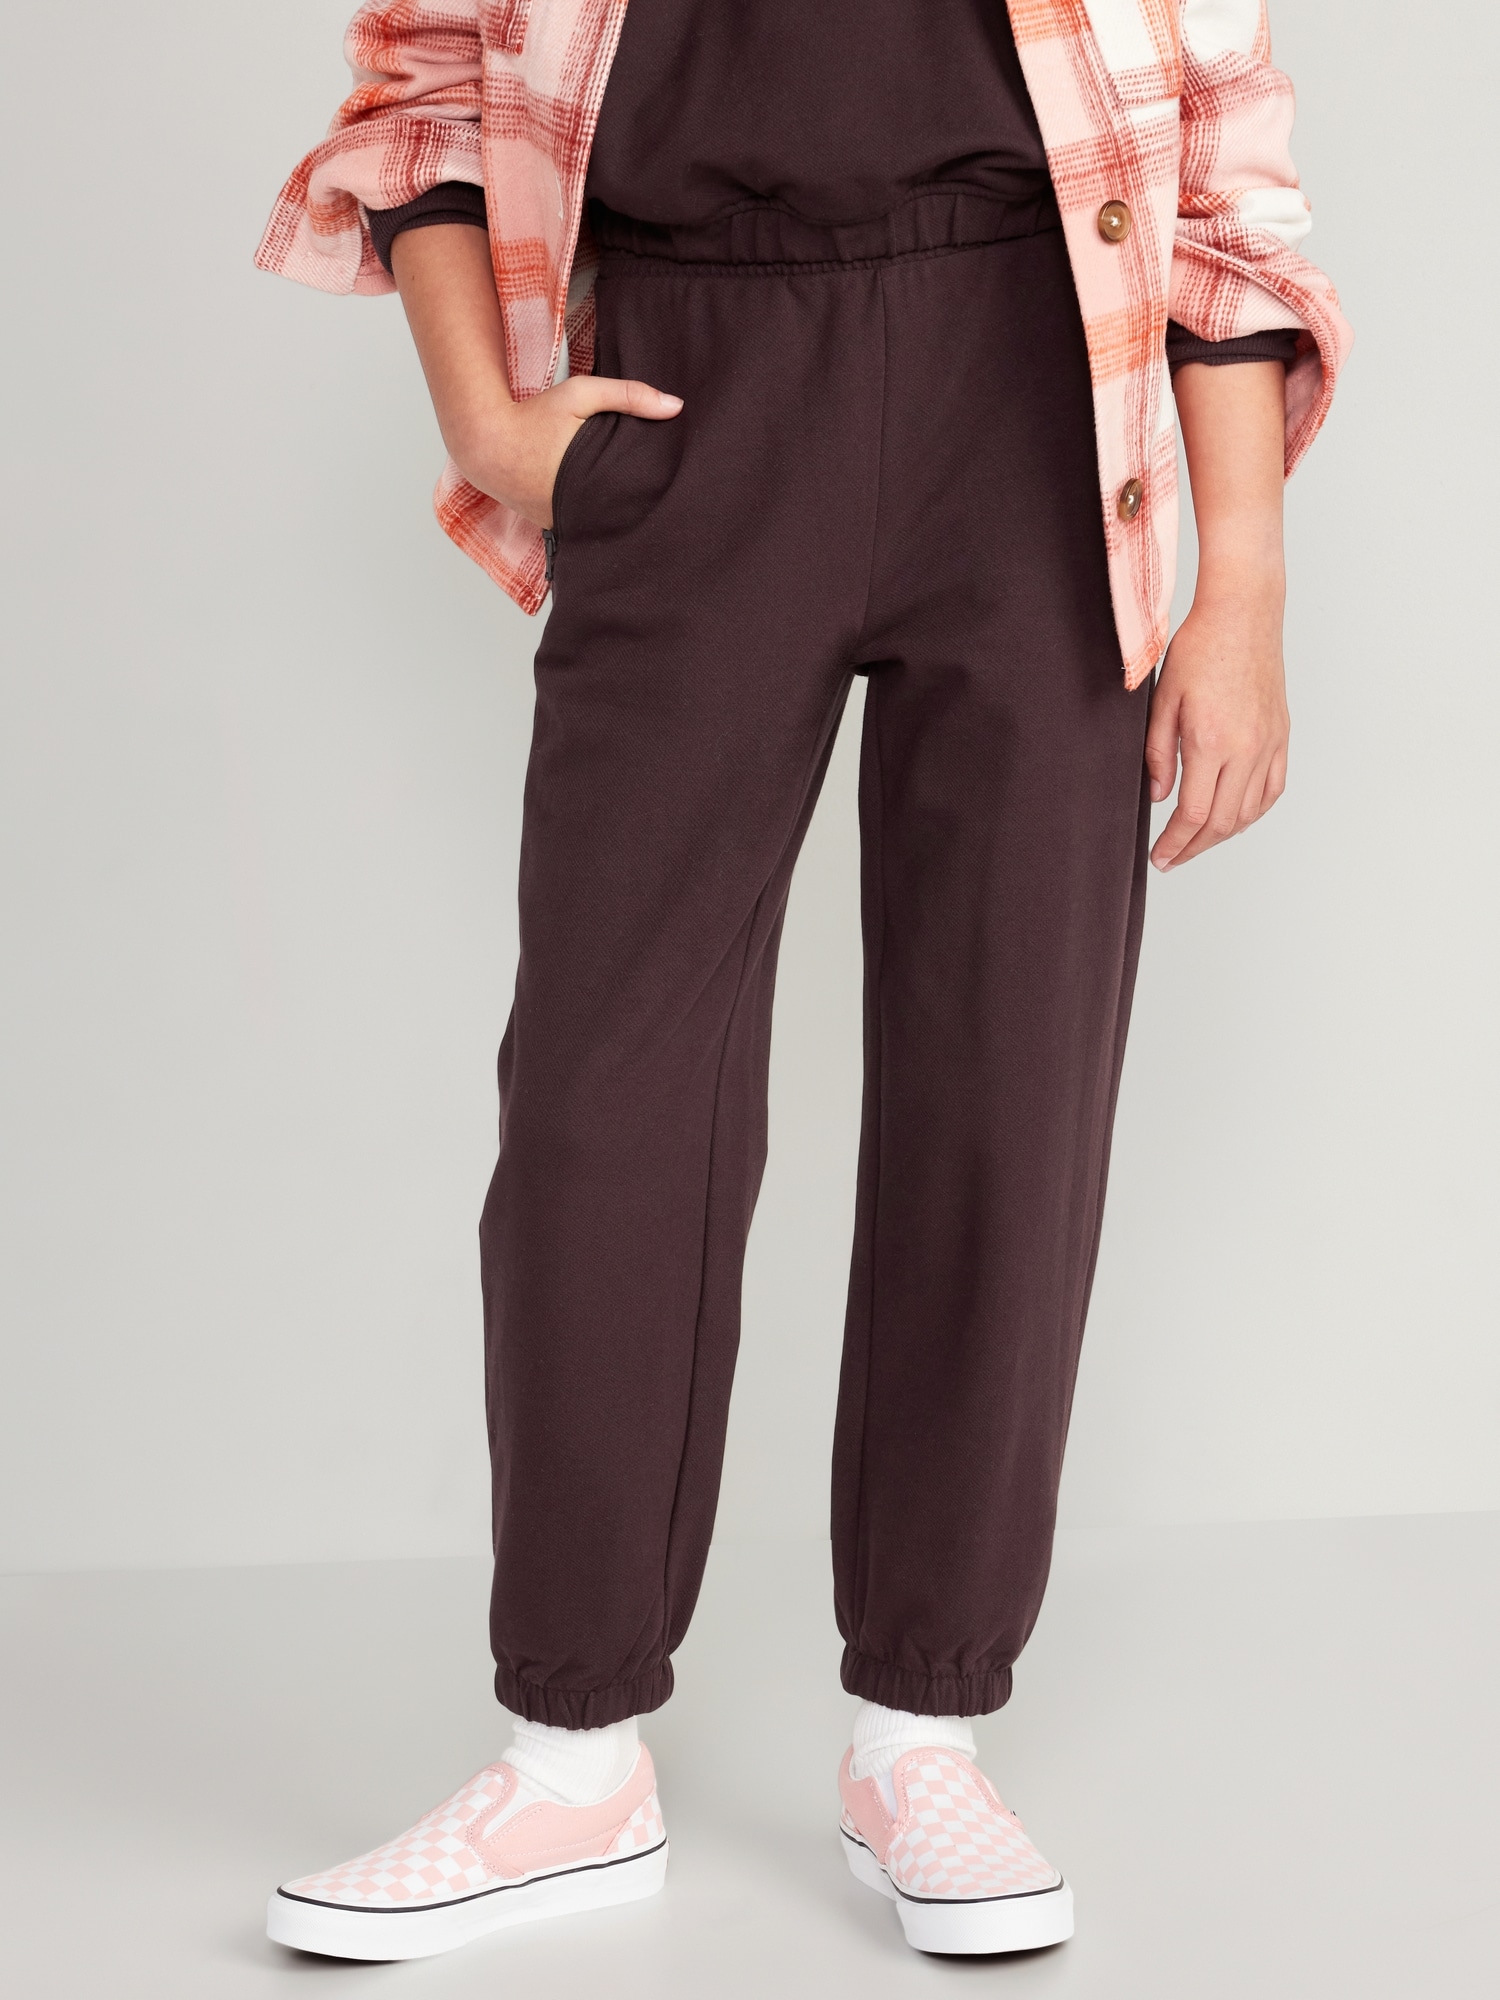 Flowy Pants With Pockets